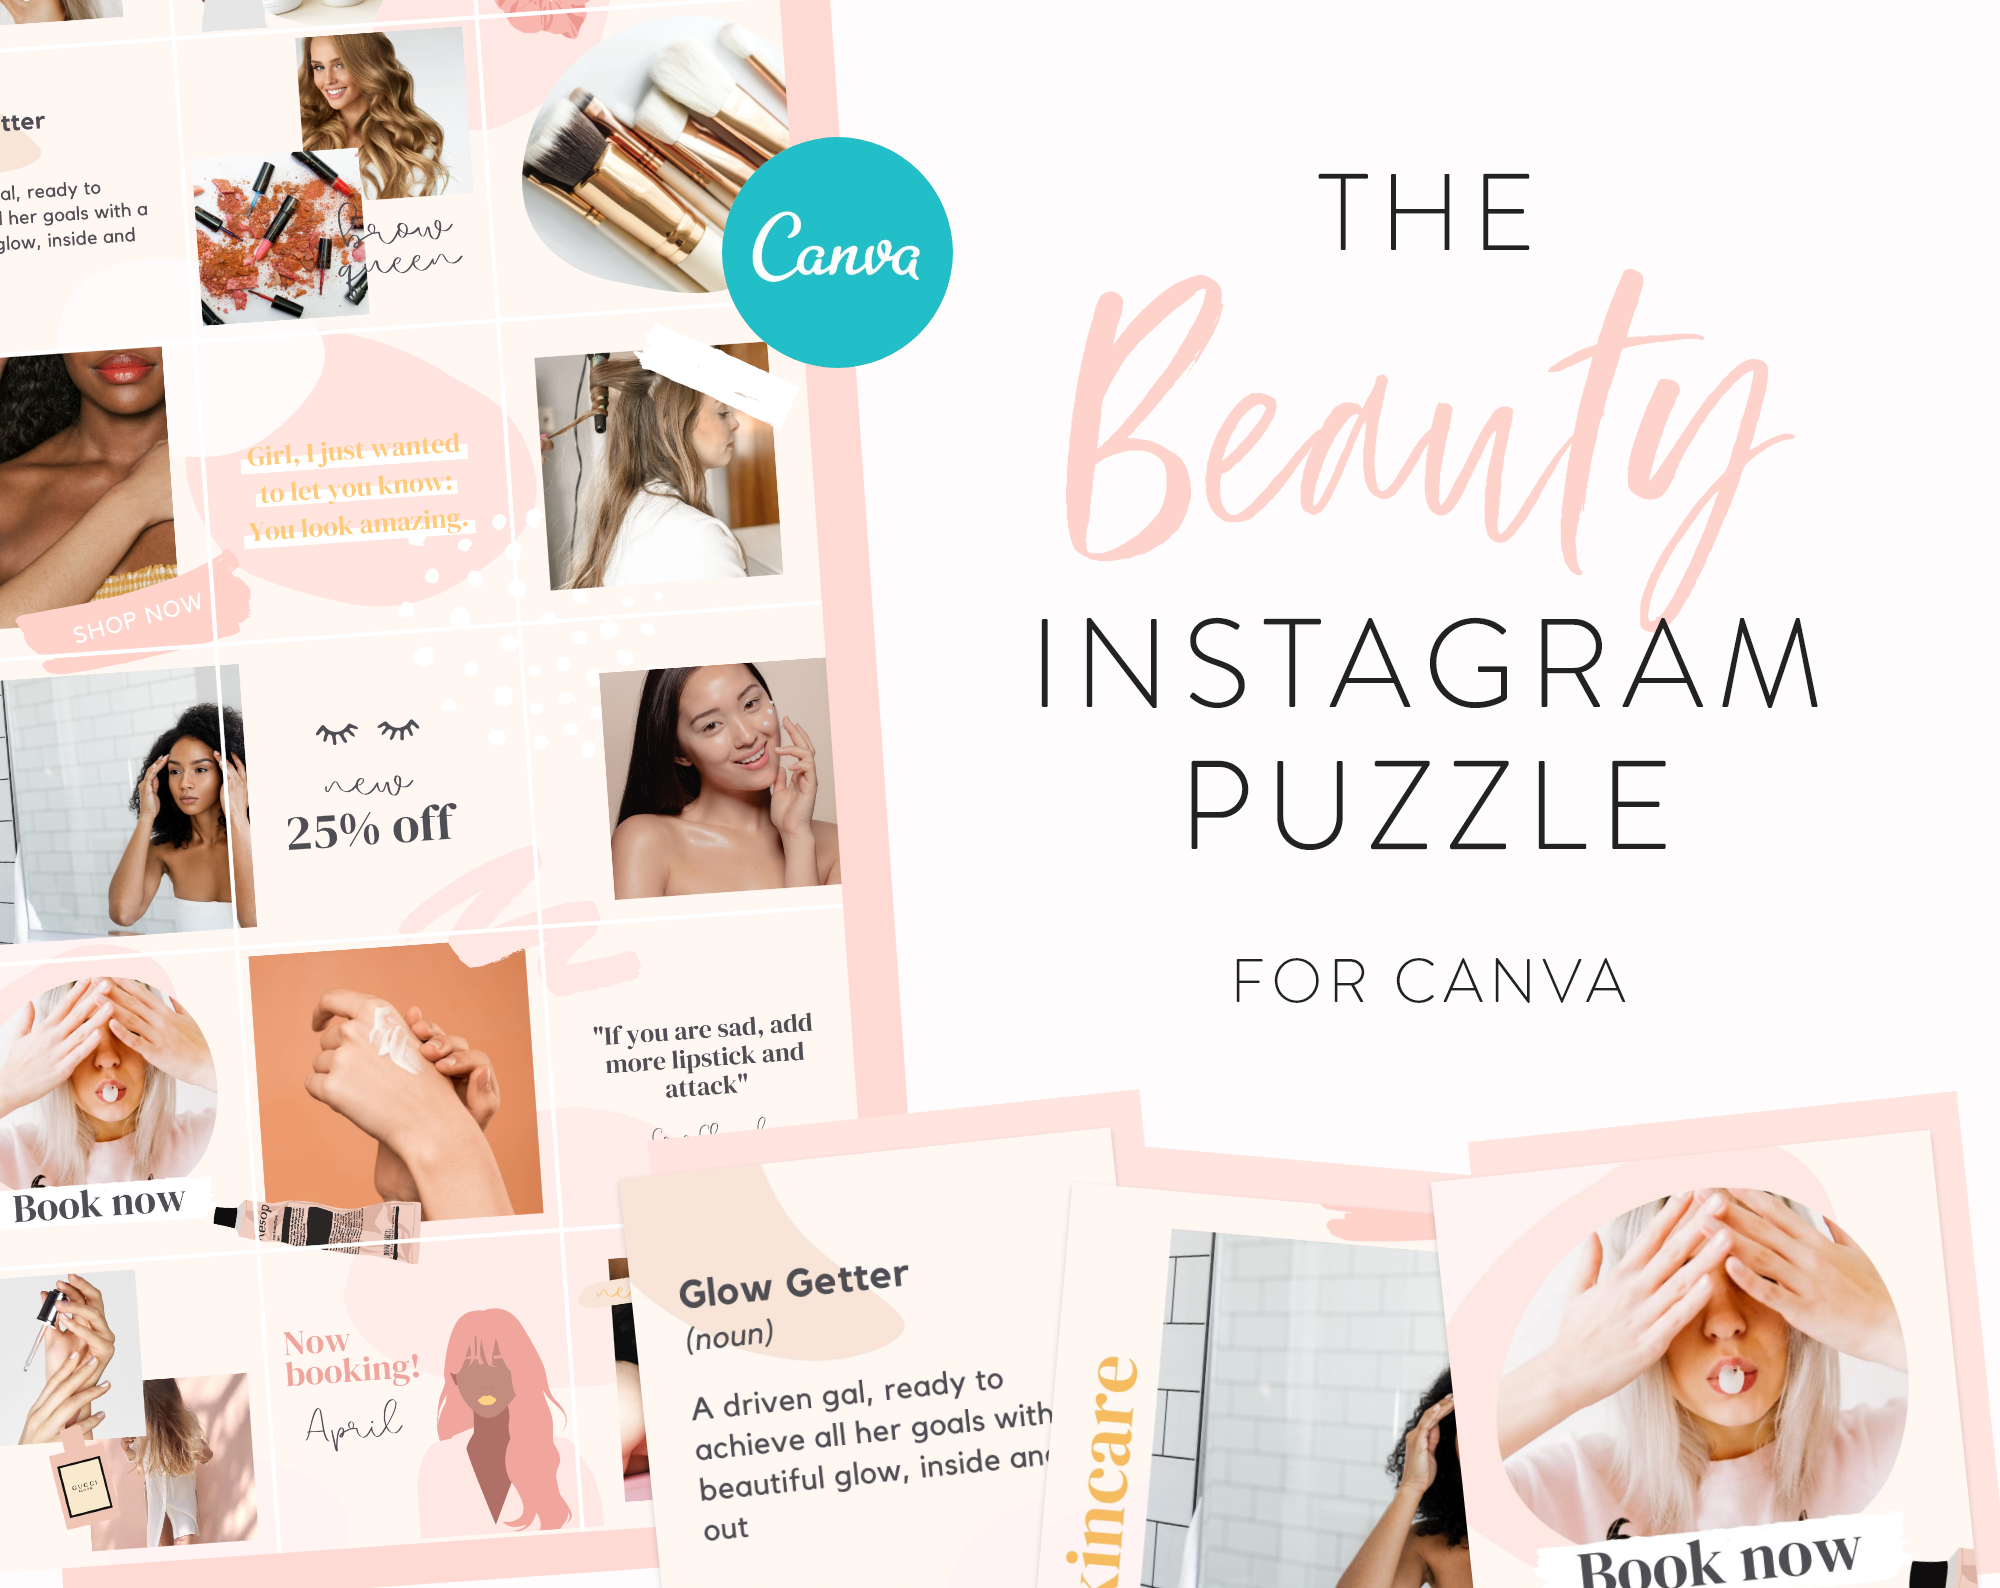 beauty-Instagram-puzzle-for-canva-templates